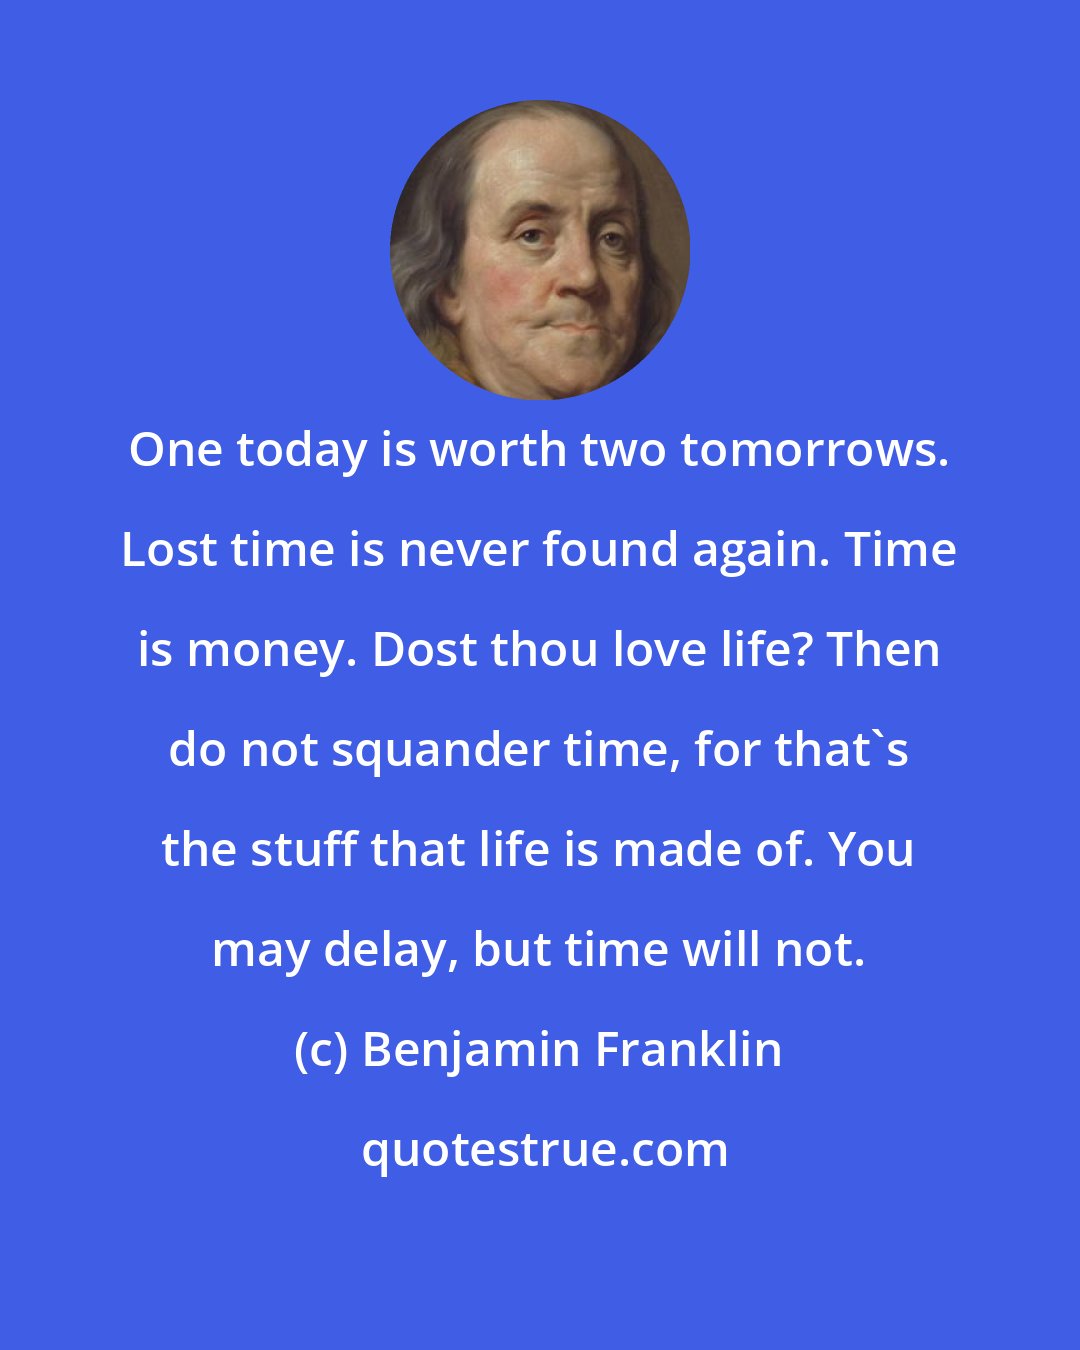 Benjamin Franklin: One today is worth two tomorrows. Lost time is never found again. Time is money. Dost thou love life? Then do not squander time, for that's the stuff that life is made of. You may delay, but time will not.